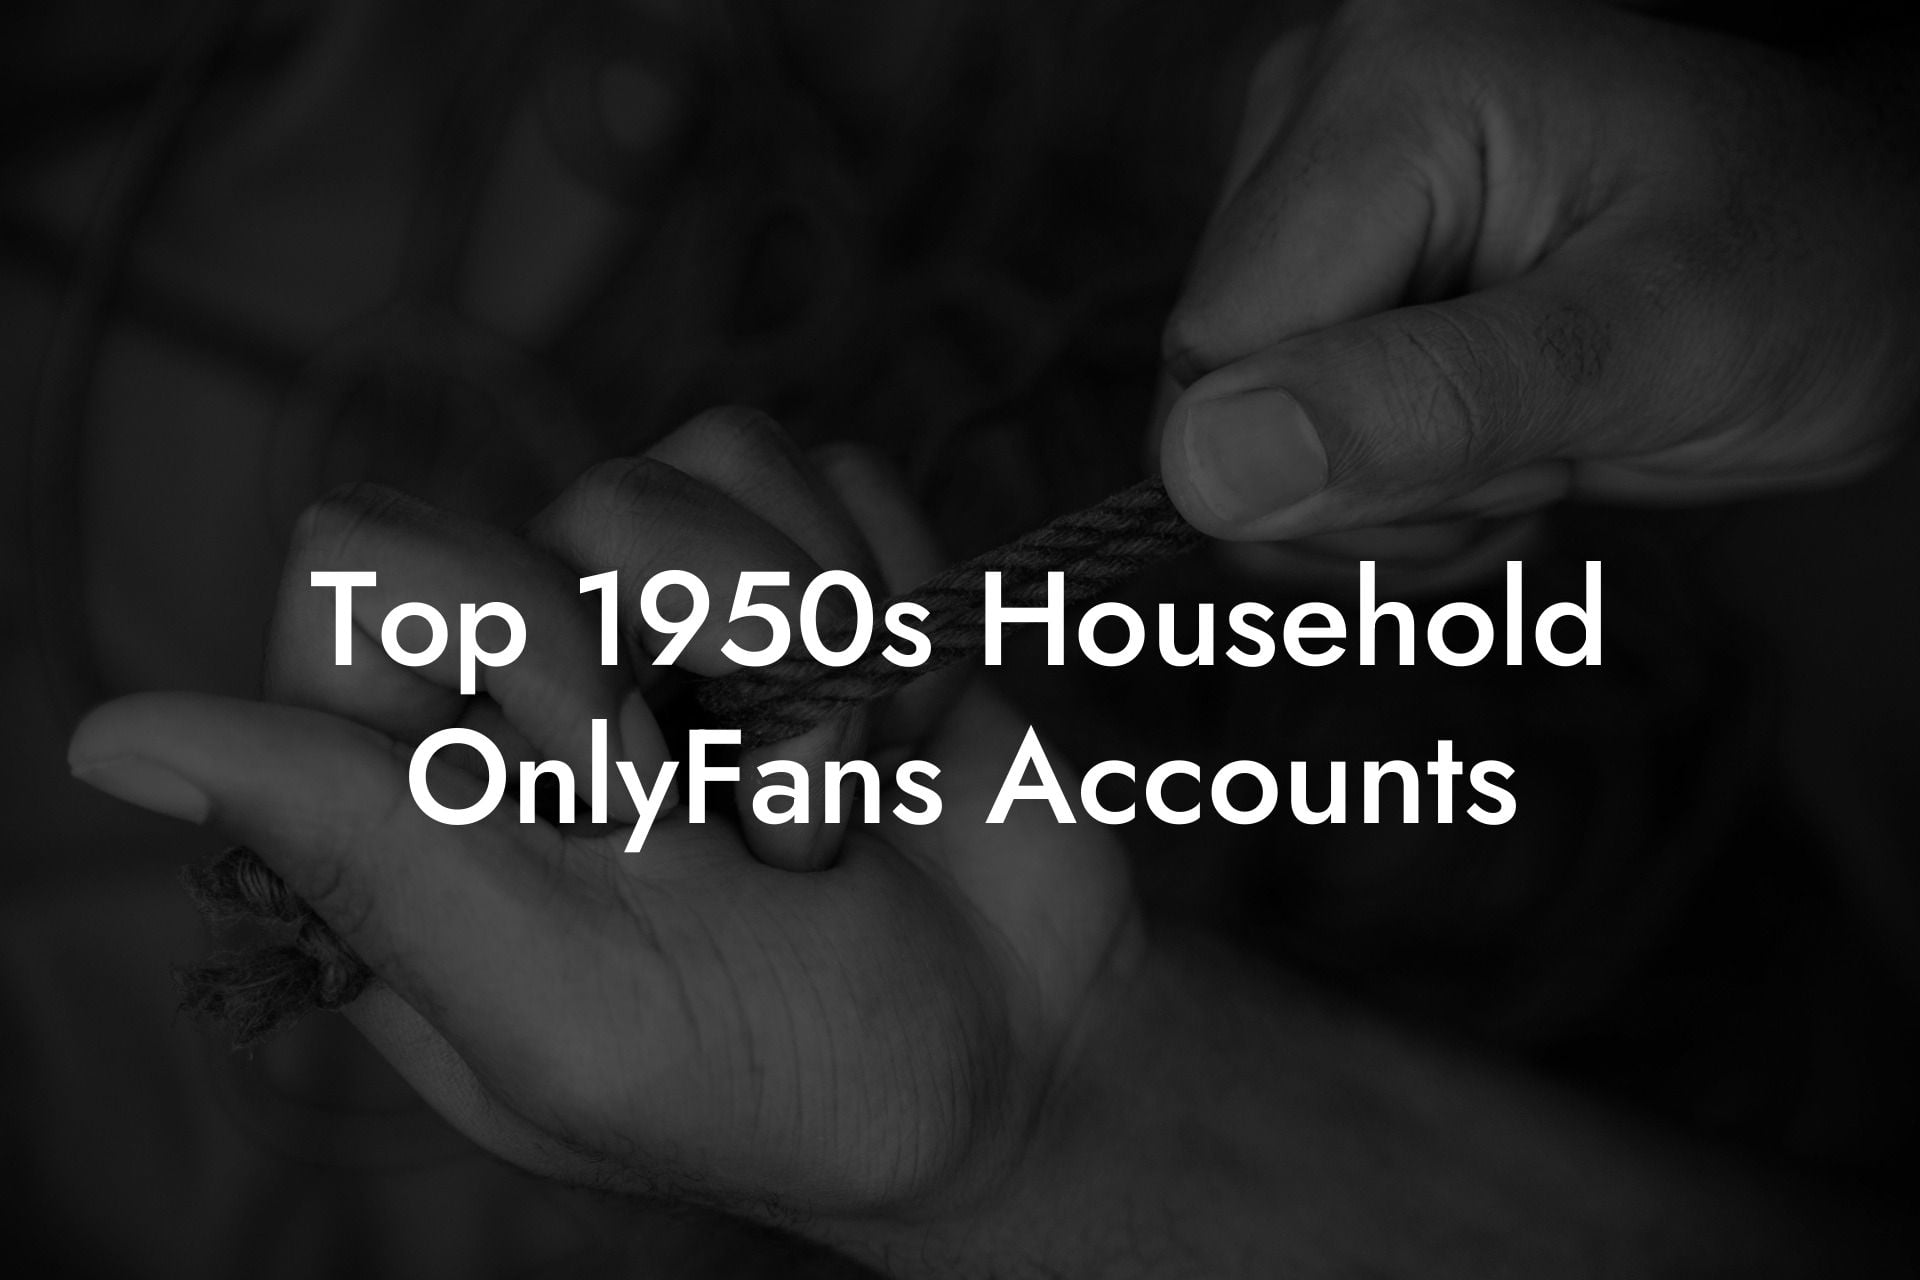 Top 1950s Household OnlyFans Accounts